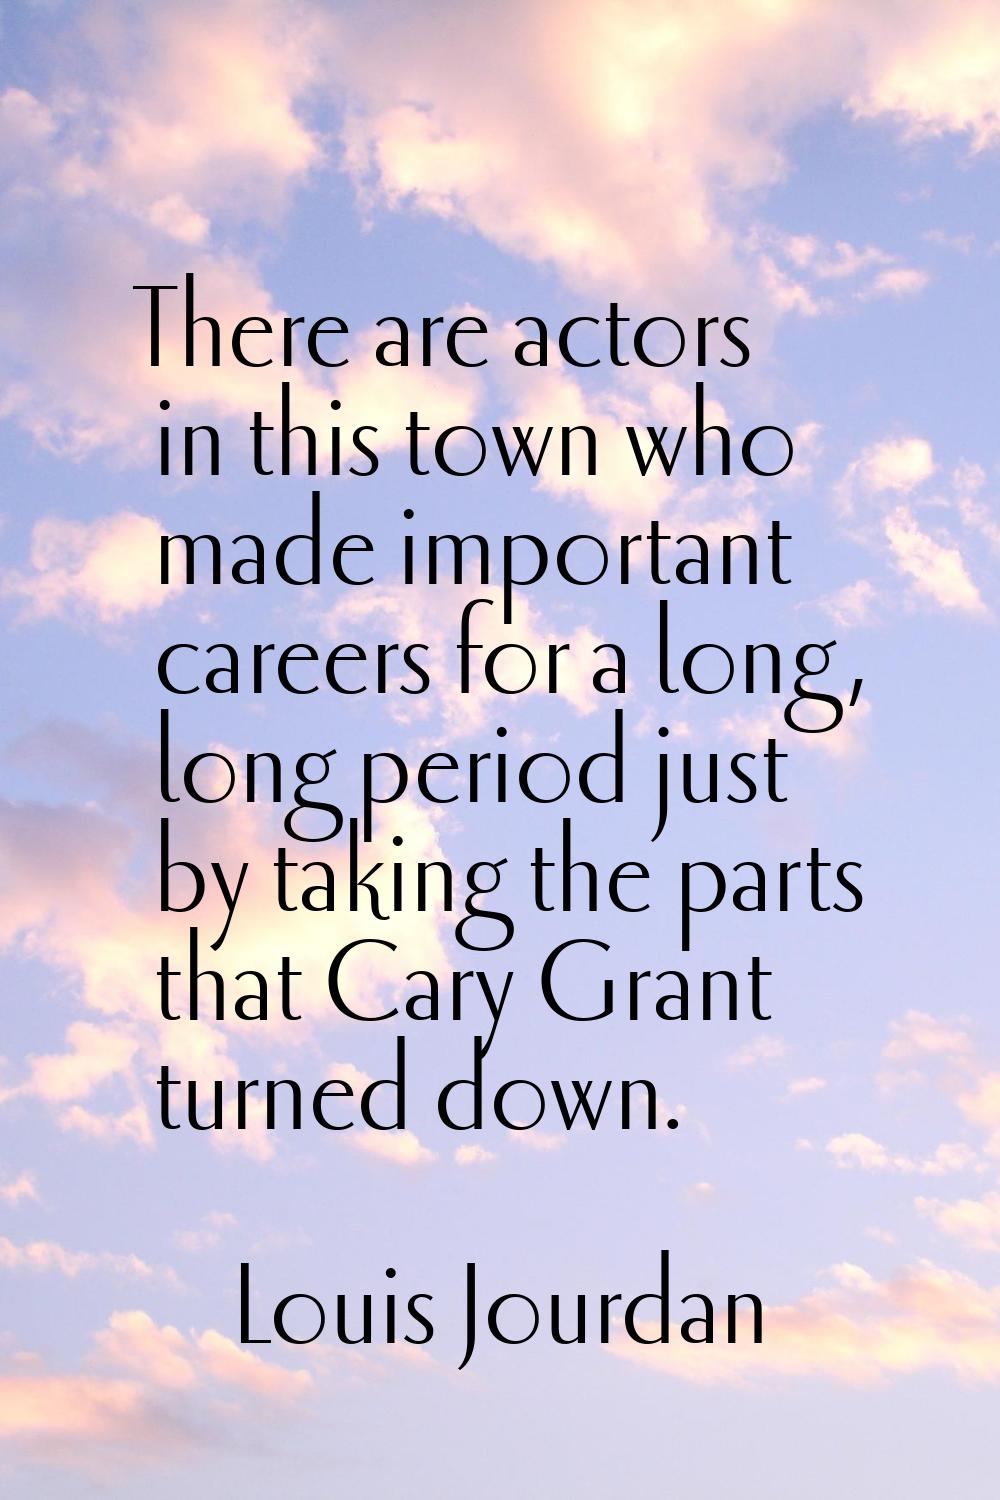 There are actors in this town who made important careers for a long, long period just by taking the